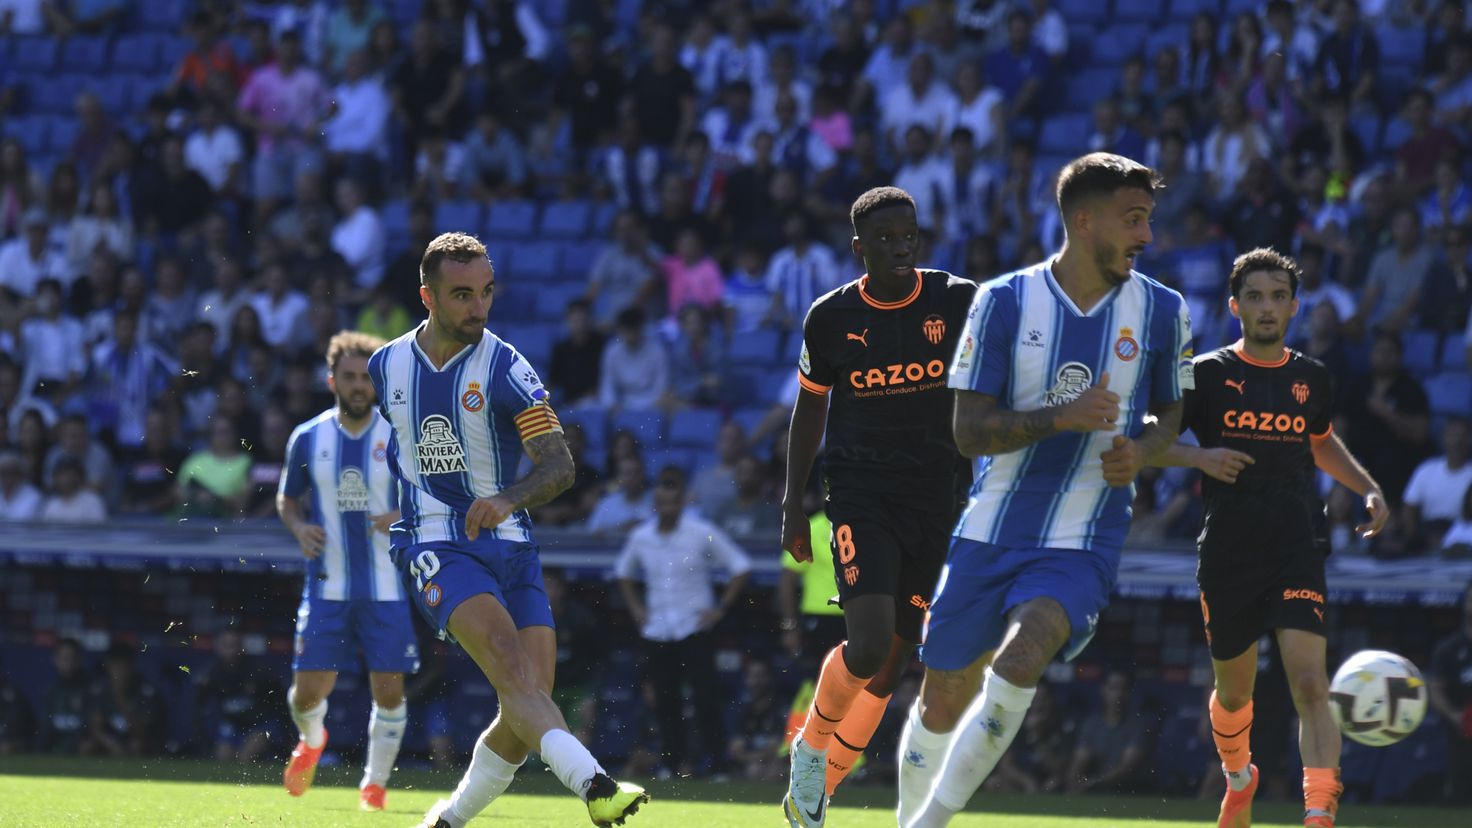 Valencia – Espanyol: TV, schedule and how to watch LaLiga Santander online today